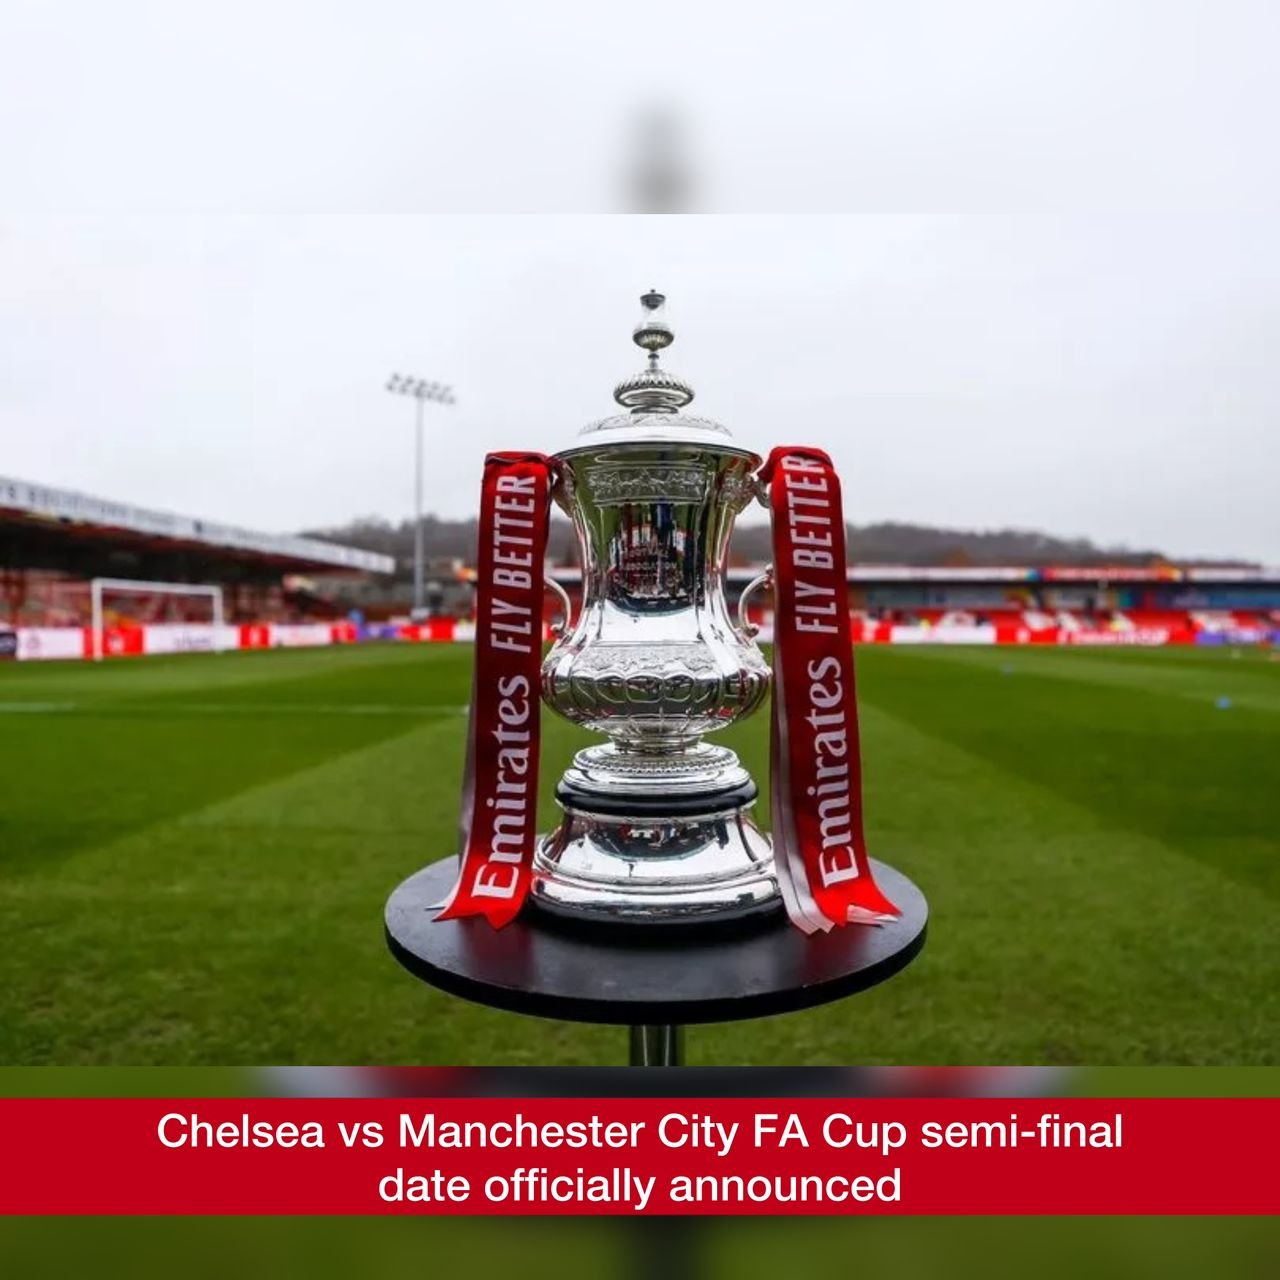 Breaking News: Official Chelsea vs Manchester City FA Cup semi-final date announced